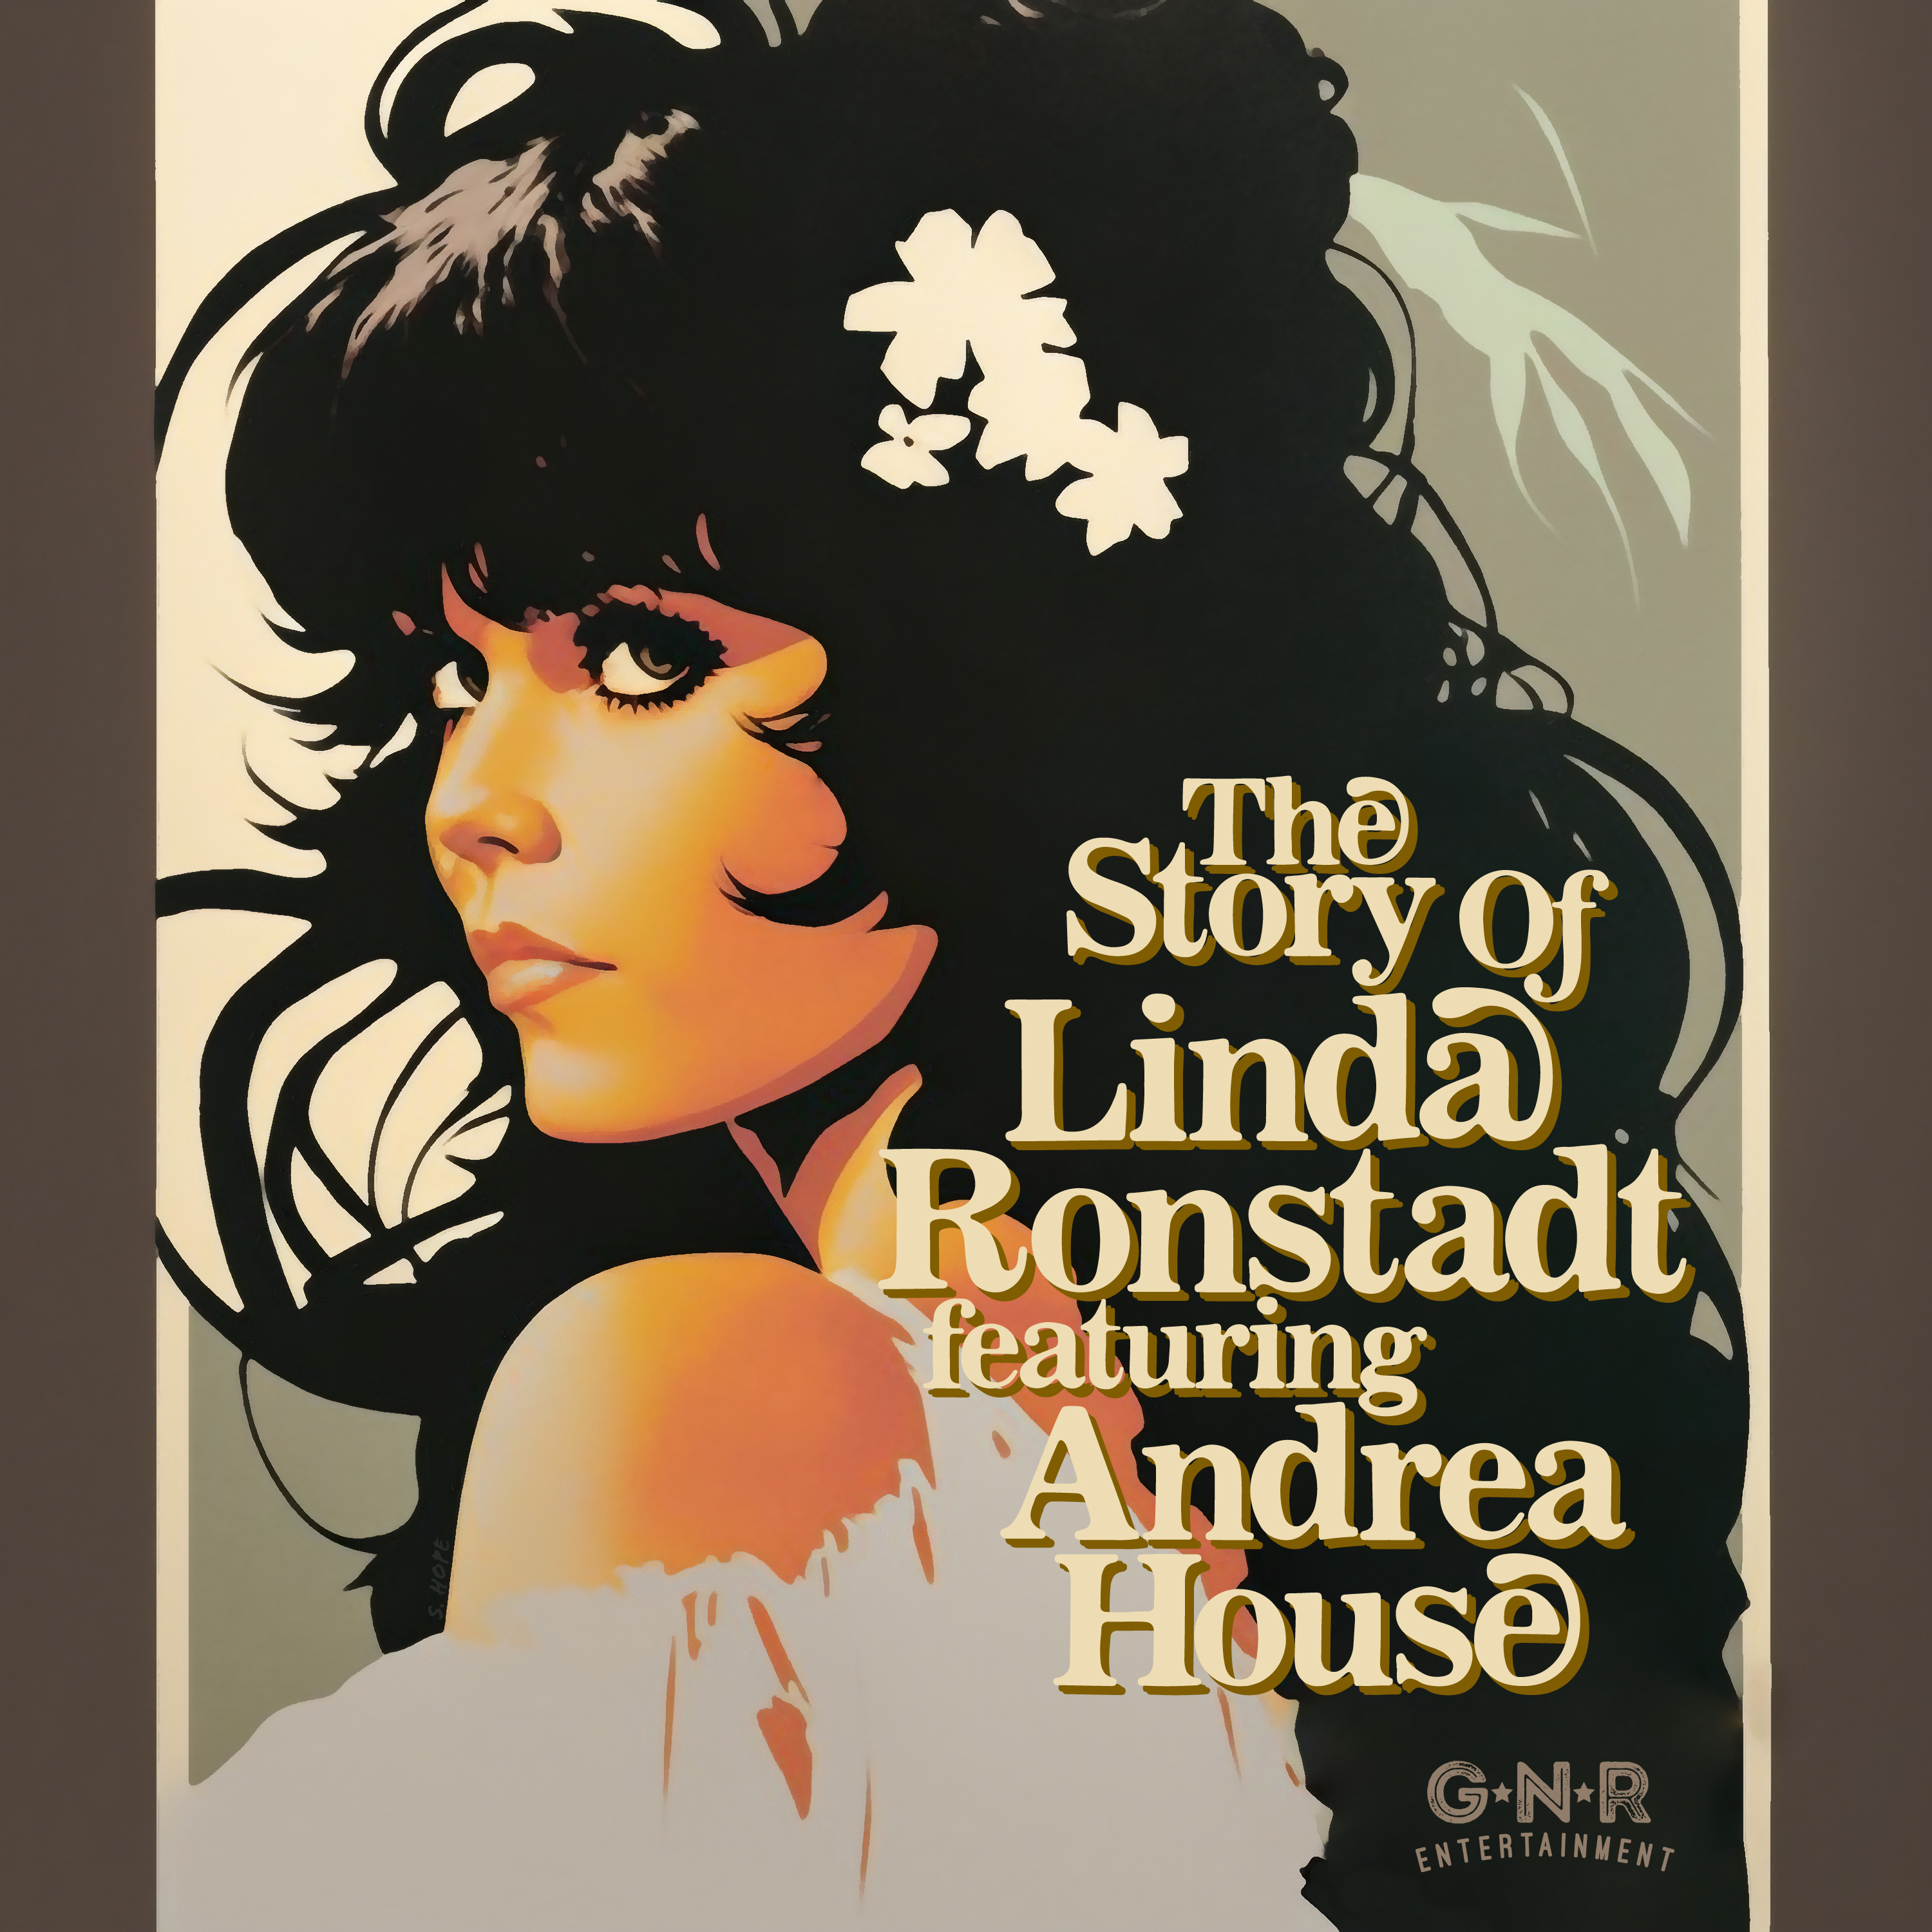  Linda Ronstadt Featuring Andrea House 